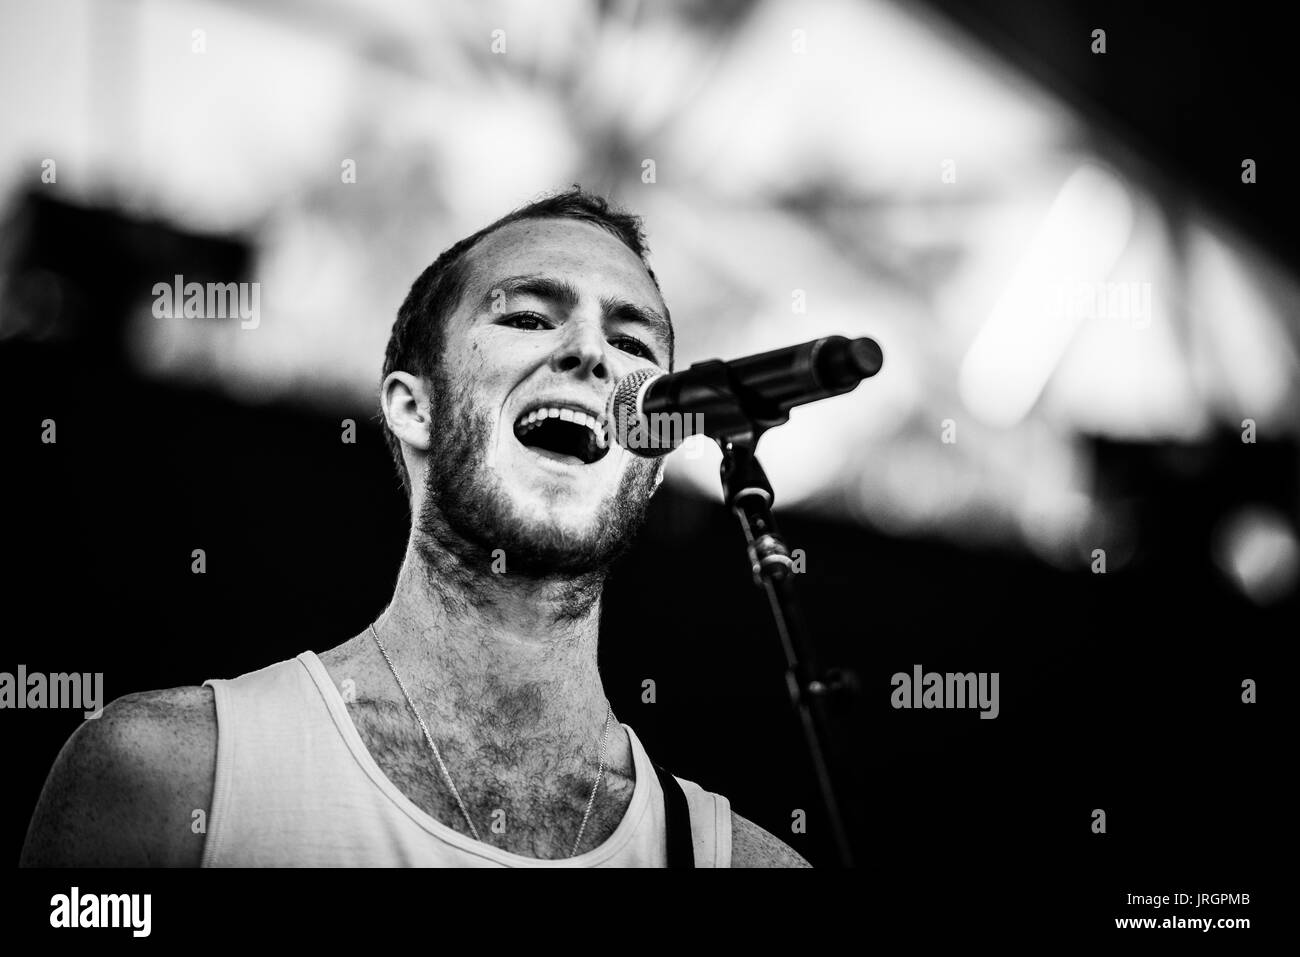 Judah & the Lion performing at a music festival in British Columbia Canada in black and white. Stock Photo